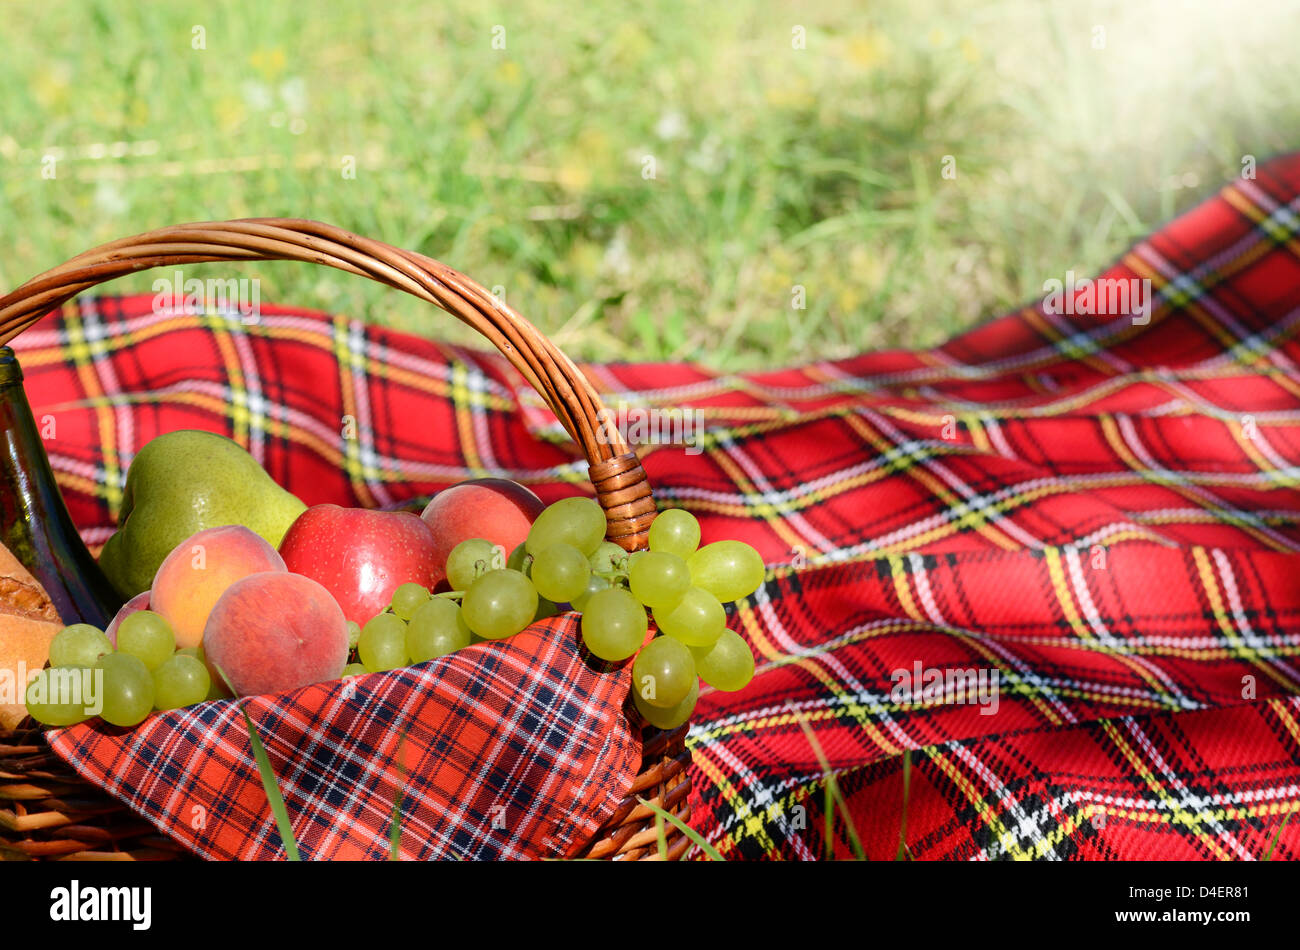 Picnic basket with red napkin fool of fruits, bread and wine Stock Photo